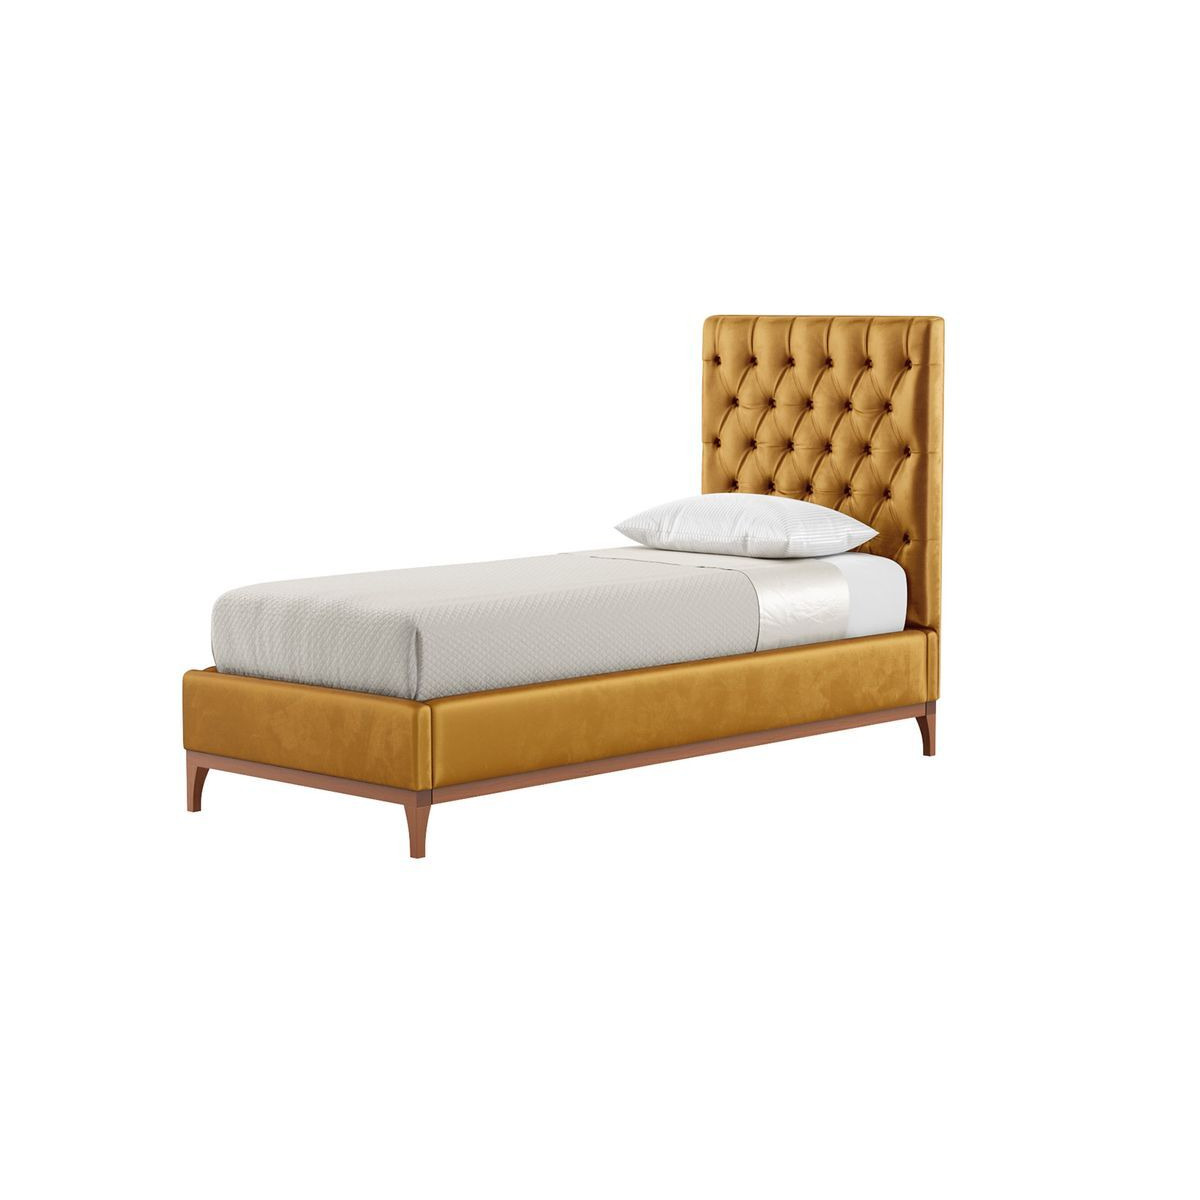 Marlon 3ft Single Bed Frame with luxury deep button quilted headboard, mustard, Leg colour: aveo - image 1